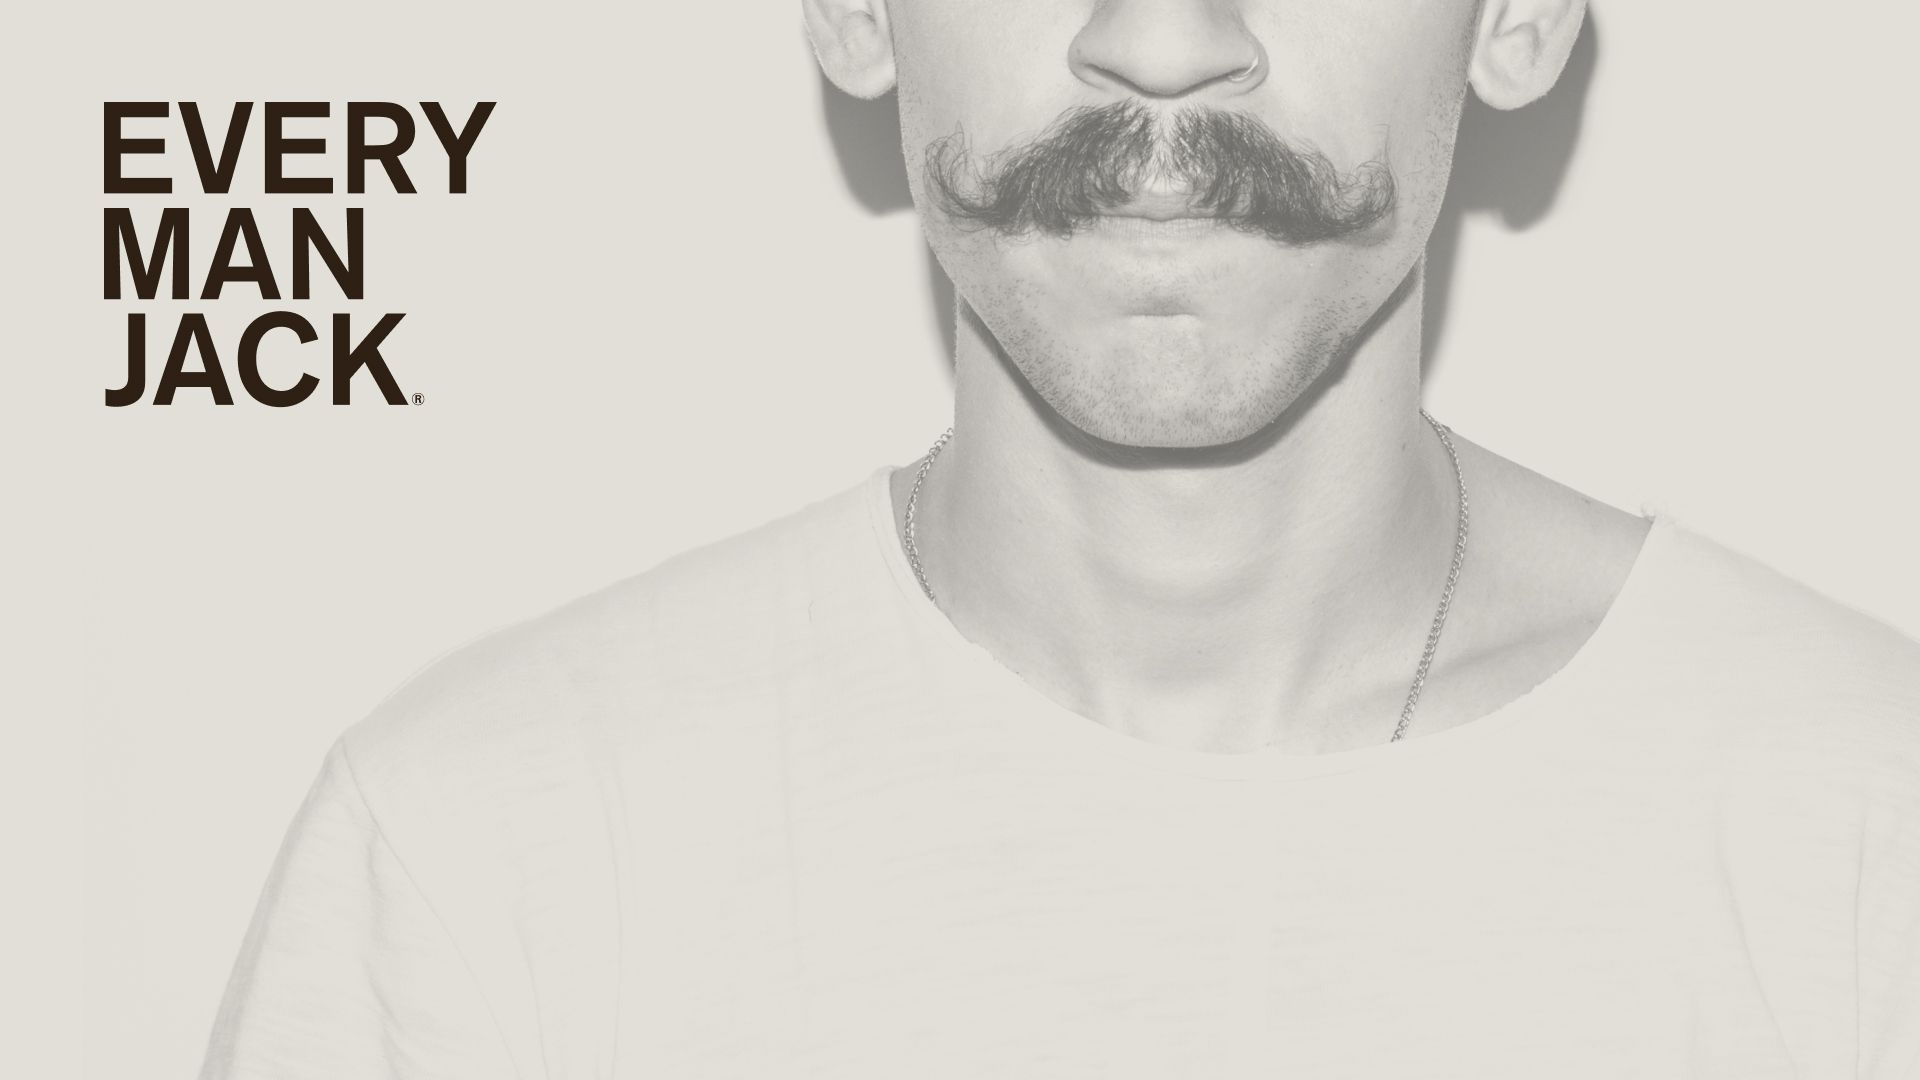 A logo that says "Every Man Jack" appears next to the photo of the lower half of a moustachioed man's face